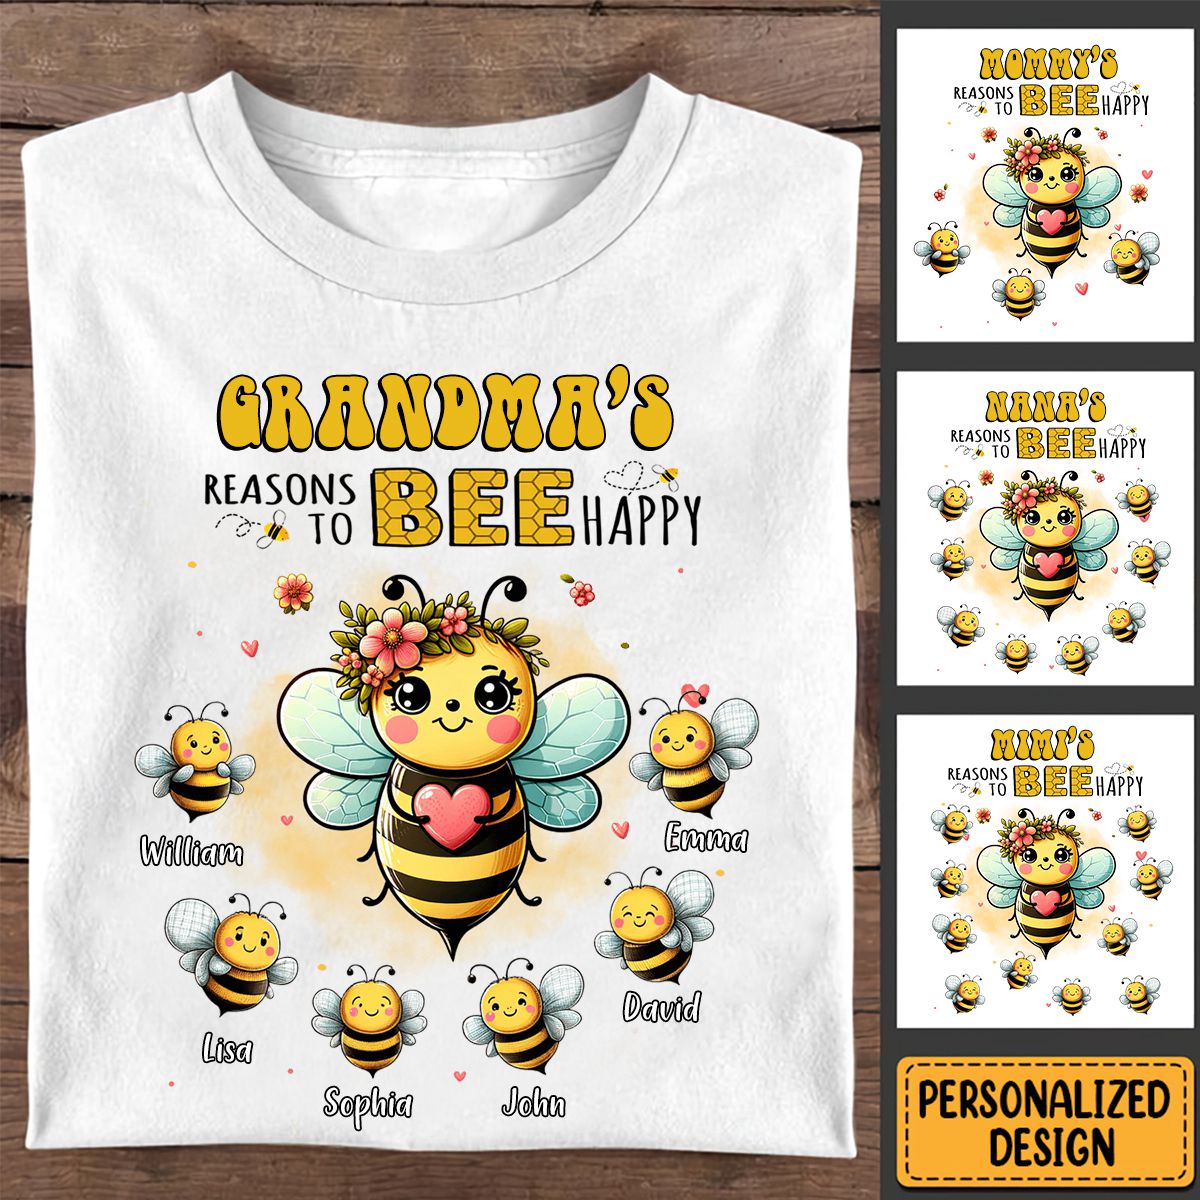 Grandma's reasons to bee happy Personalized T-shirt